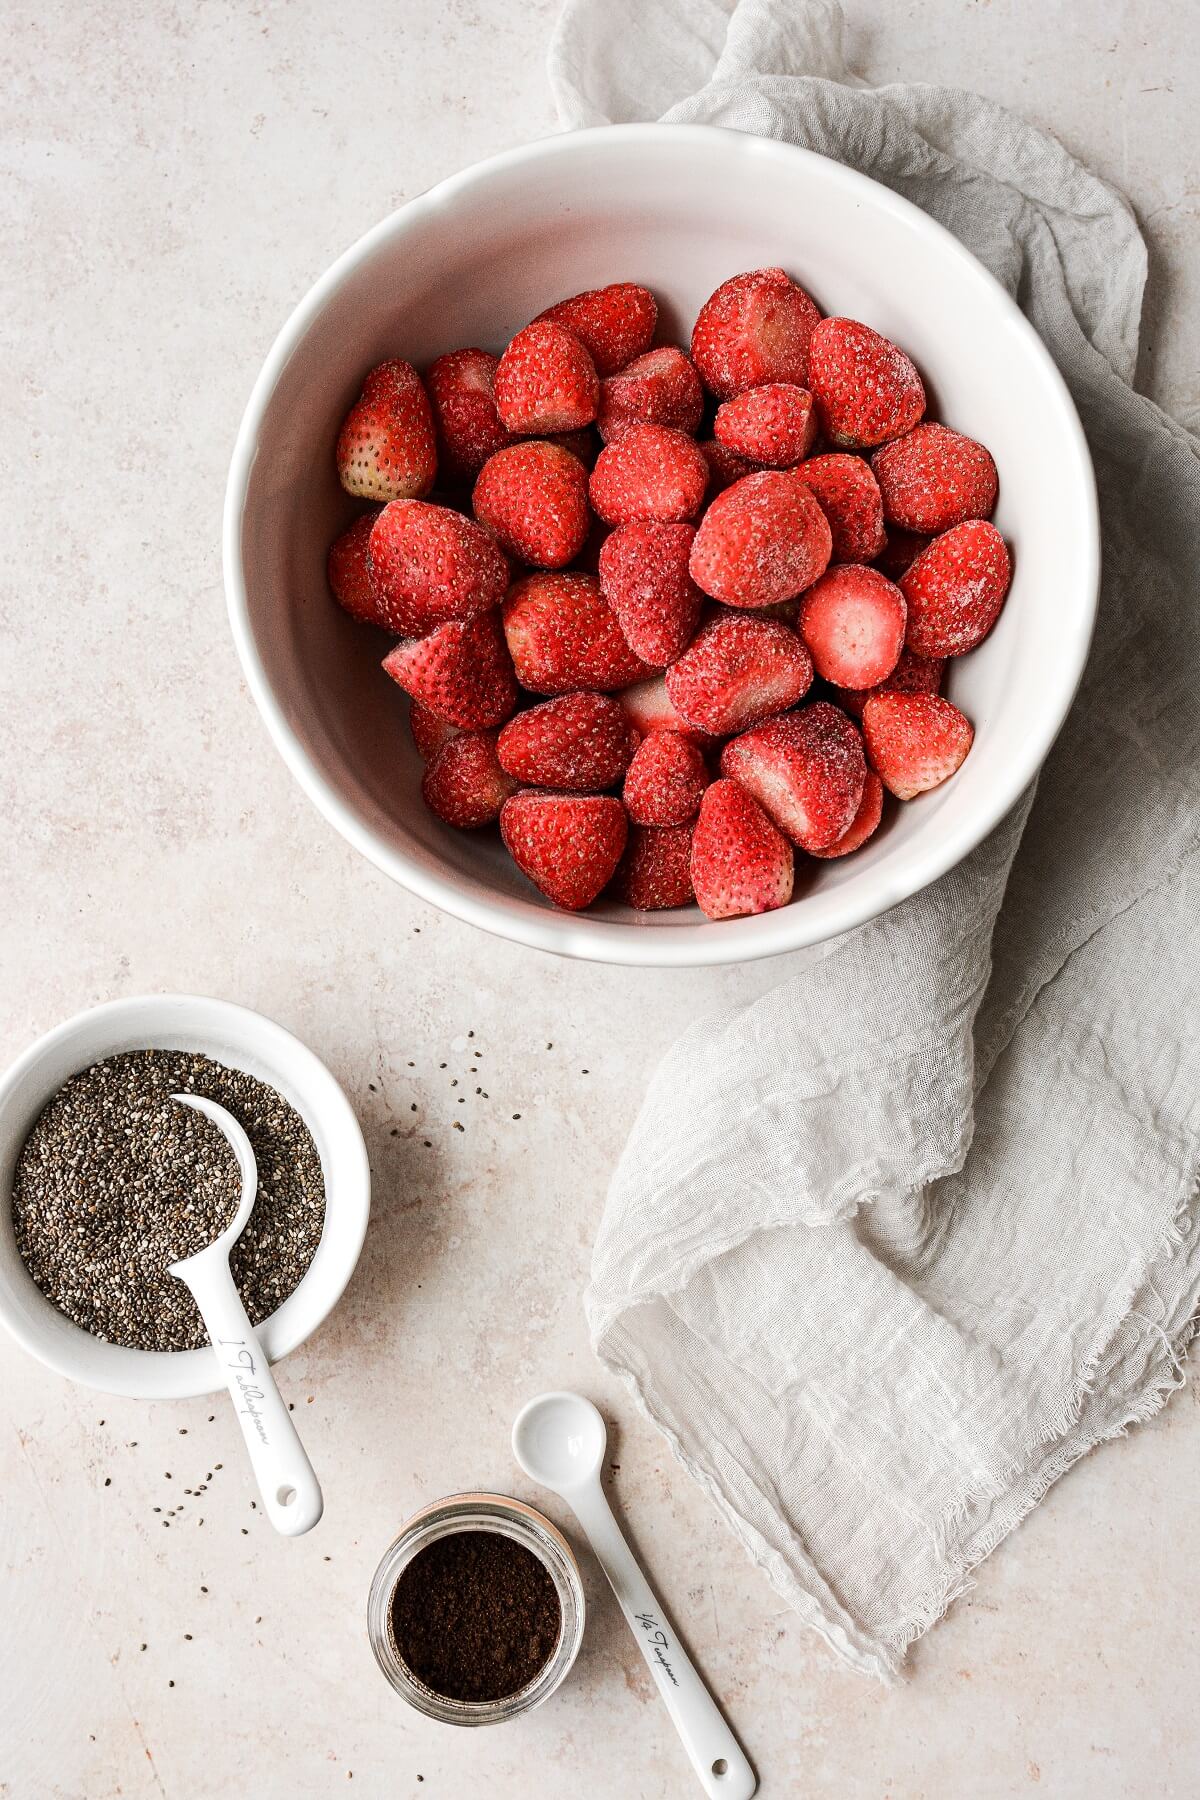 Ingredients for making strawberry chia seed jam.